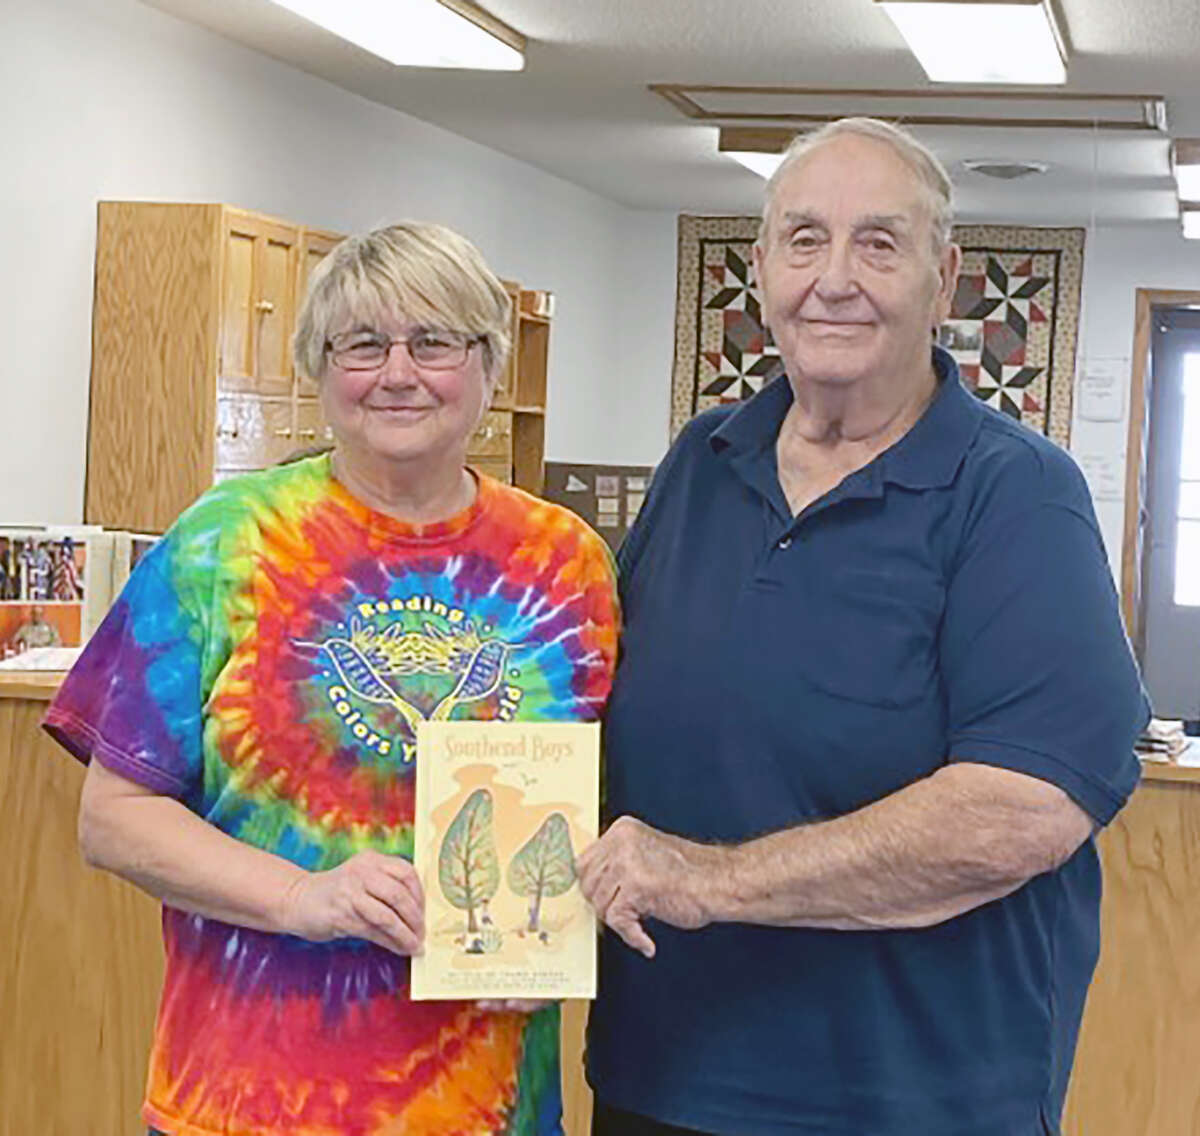 Dr. Thomas Newman (right) presents a copy of his book, “Southend Boys,” to Janet Wells, librarian at M-C River Valley Library in Meredosia. Newman’s book is a collection of stories recalling his childhood adventures with his friends, the Southend Boys, in small-town Meredosia.